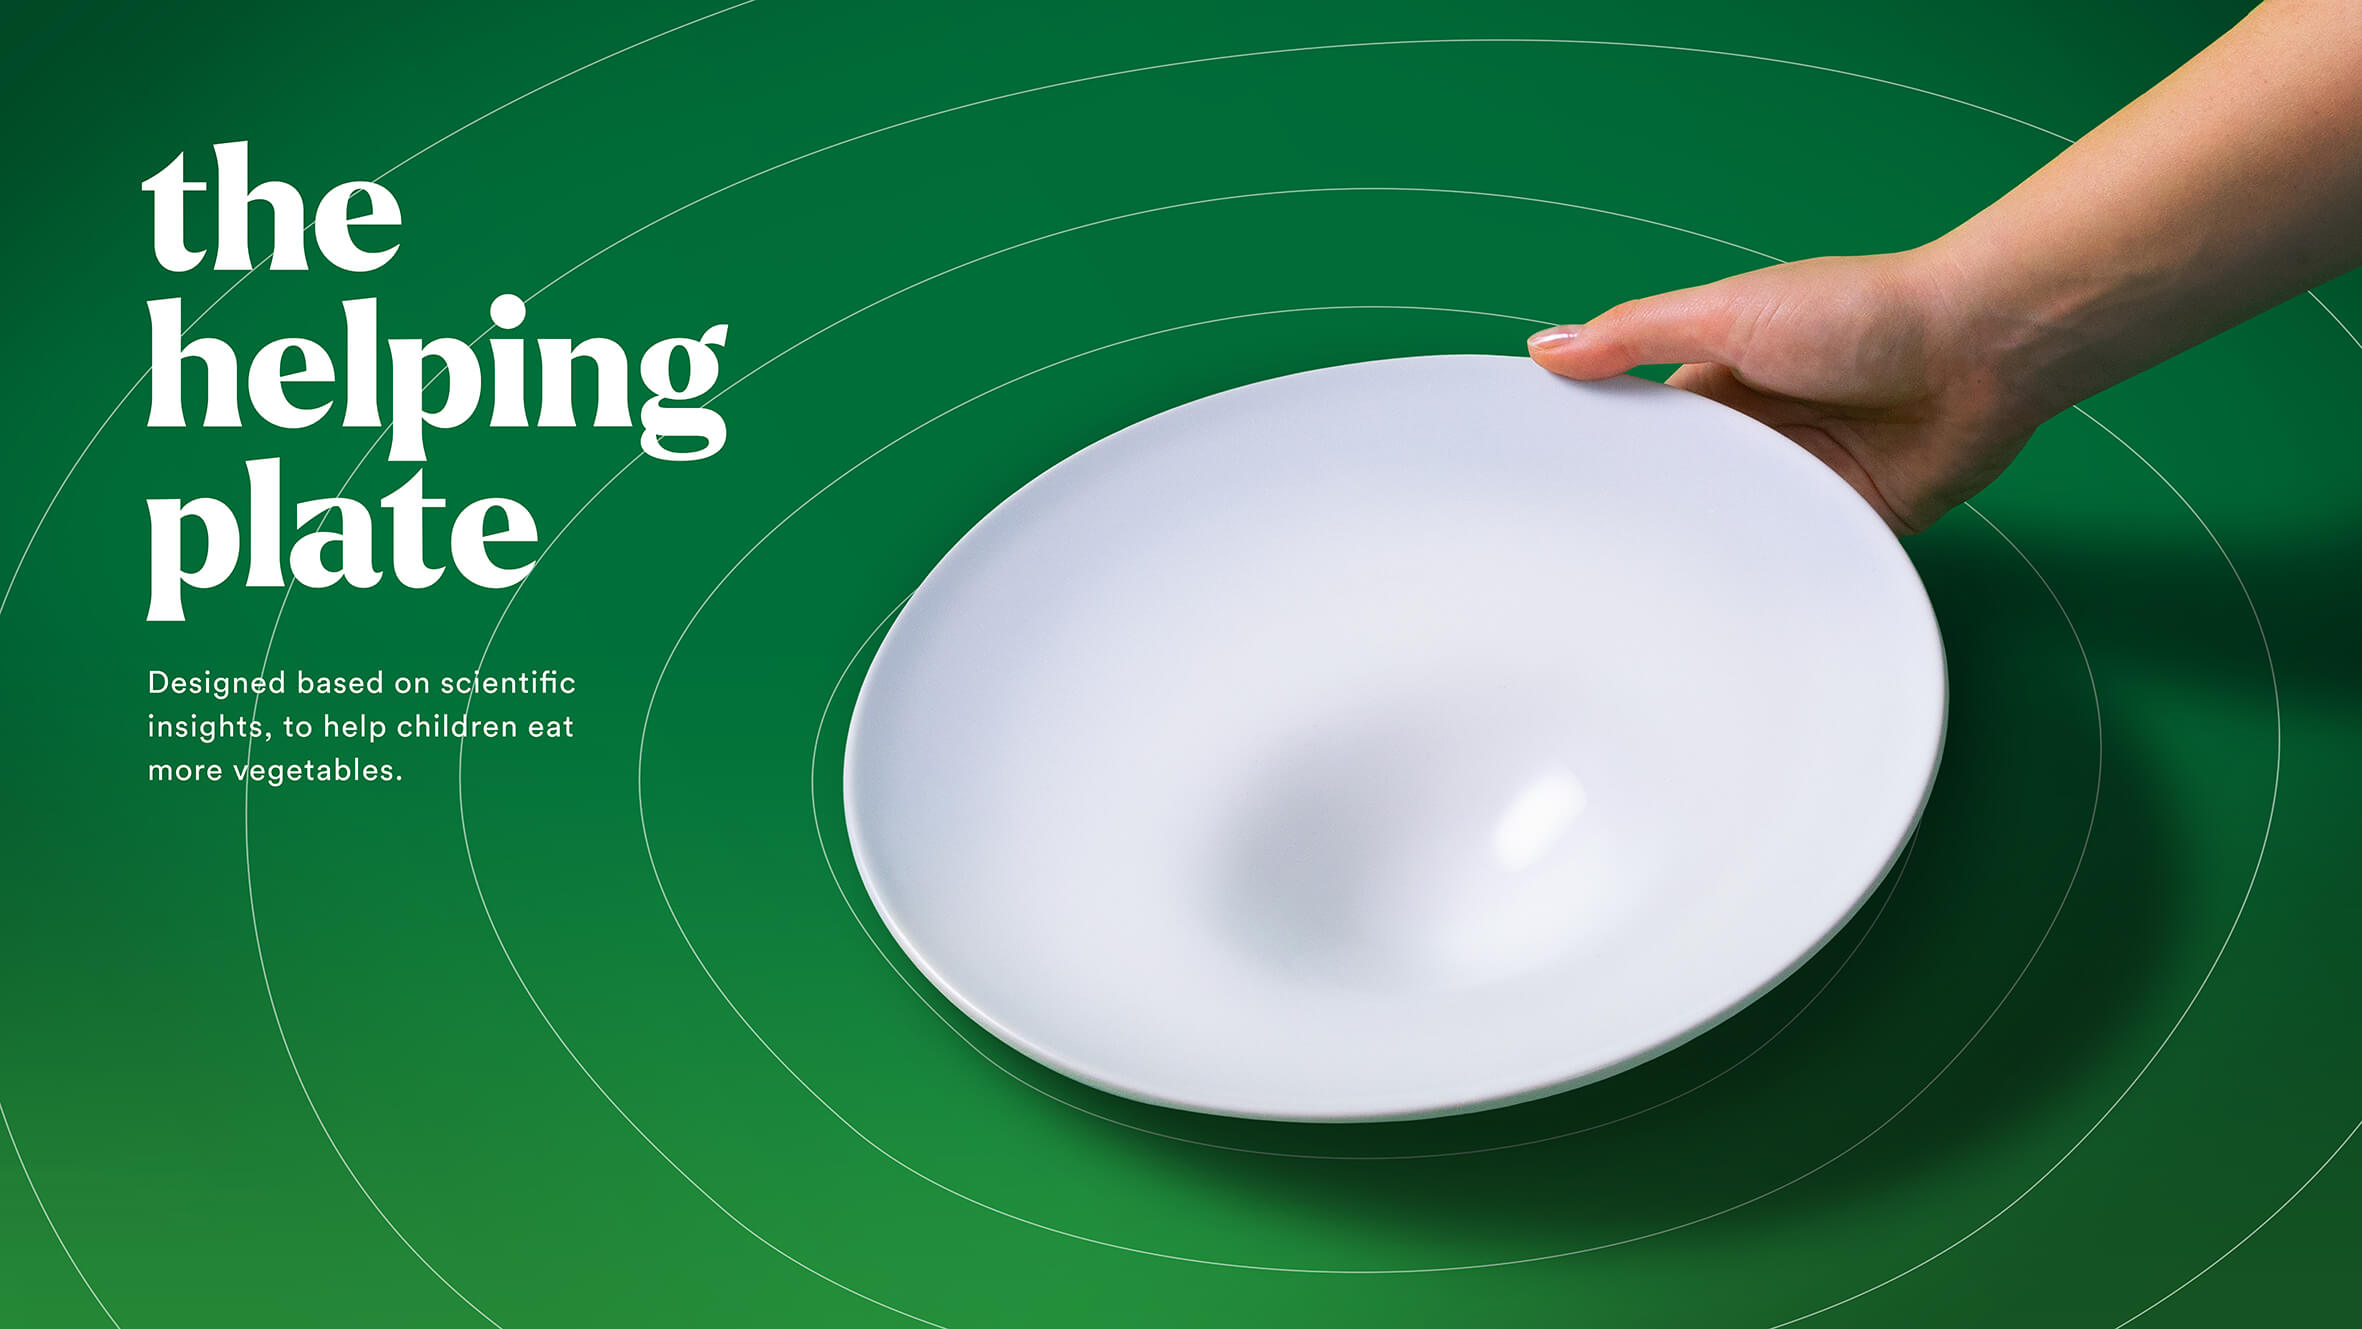 The Helping Plate by HAK